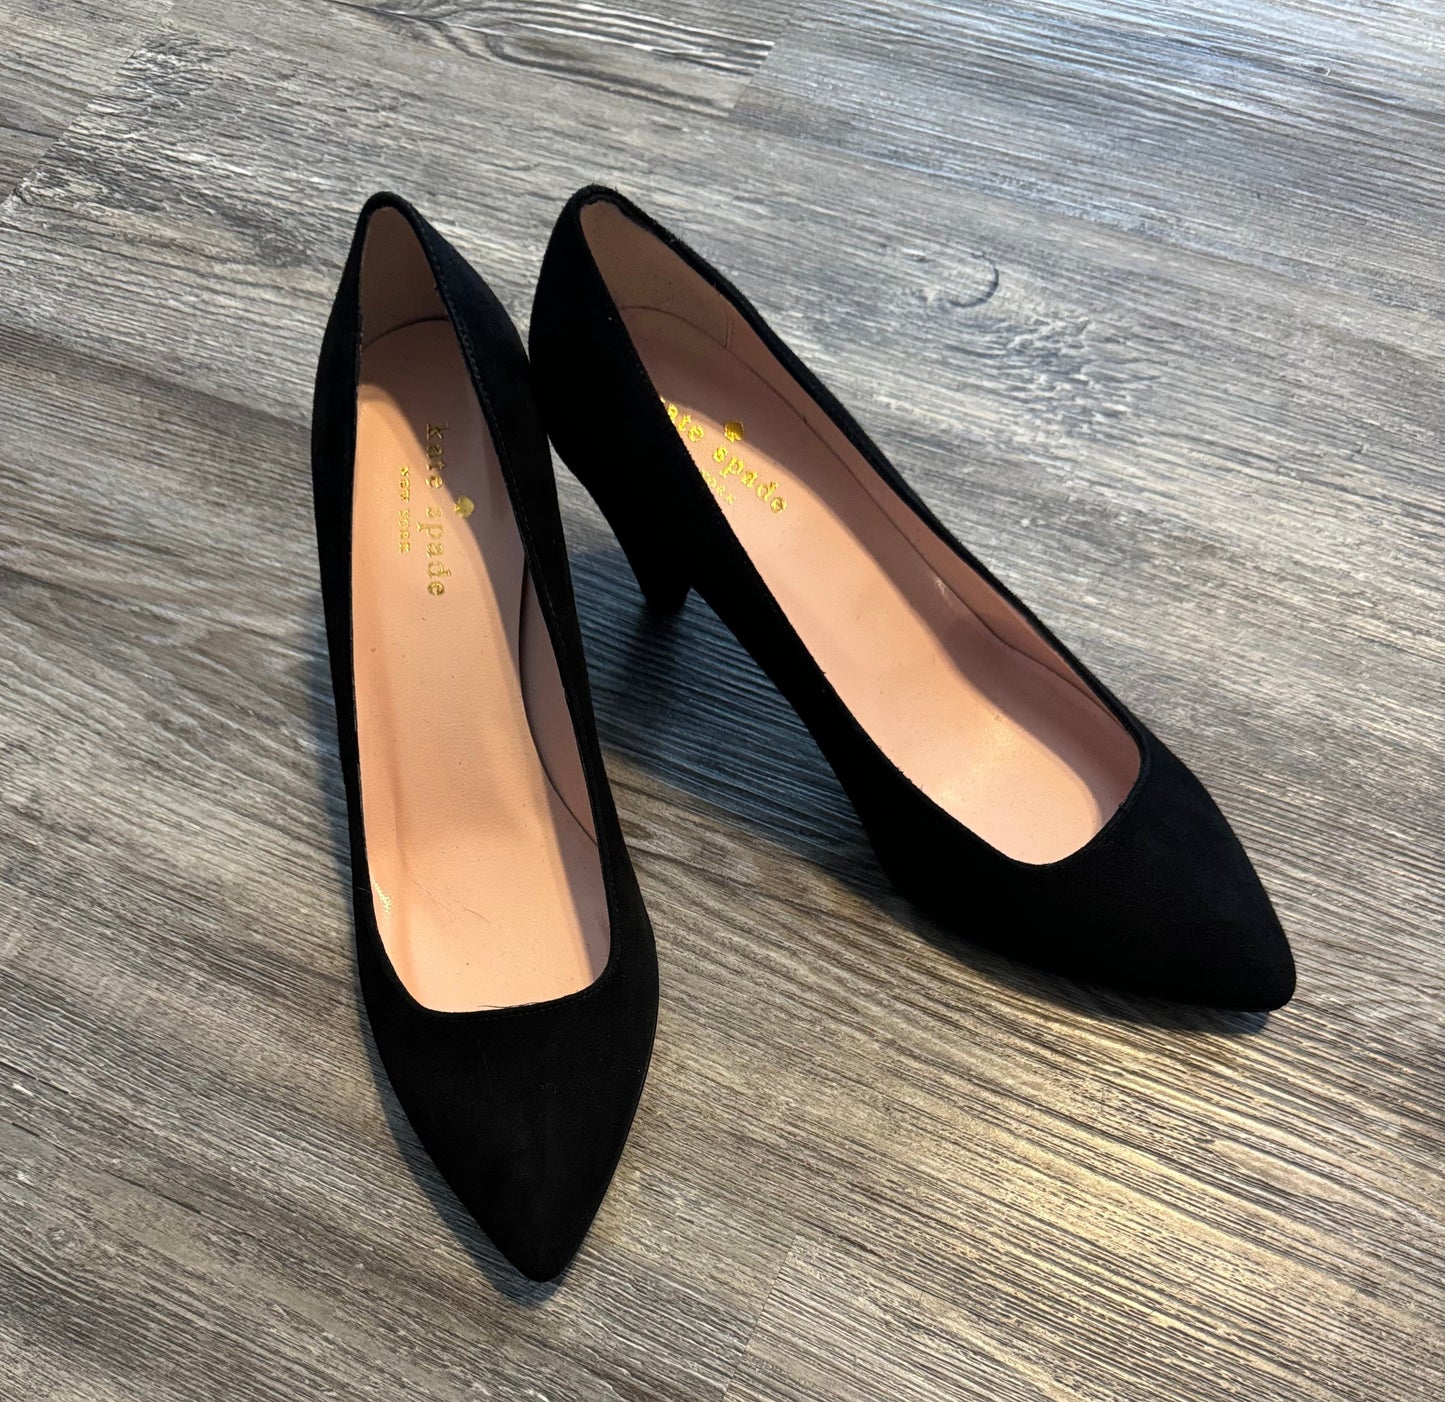 Shoes Heels Stiletto By Kate Spade  Size: 6.5